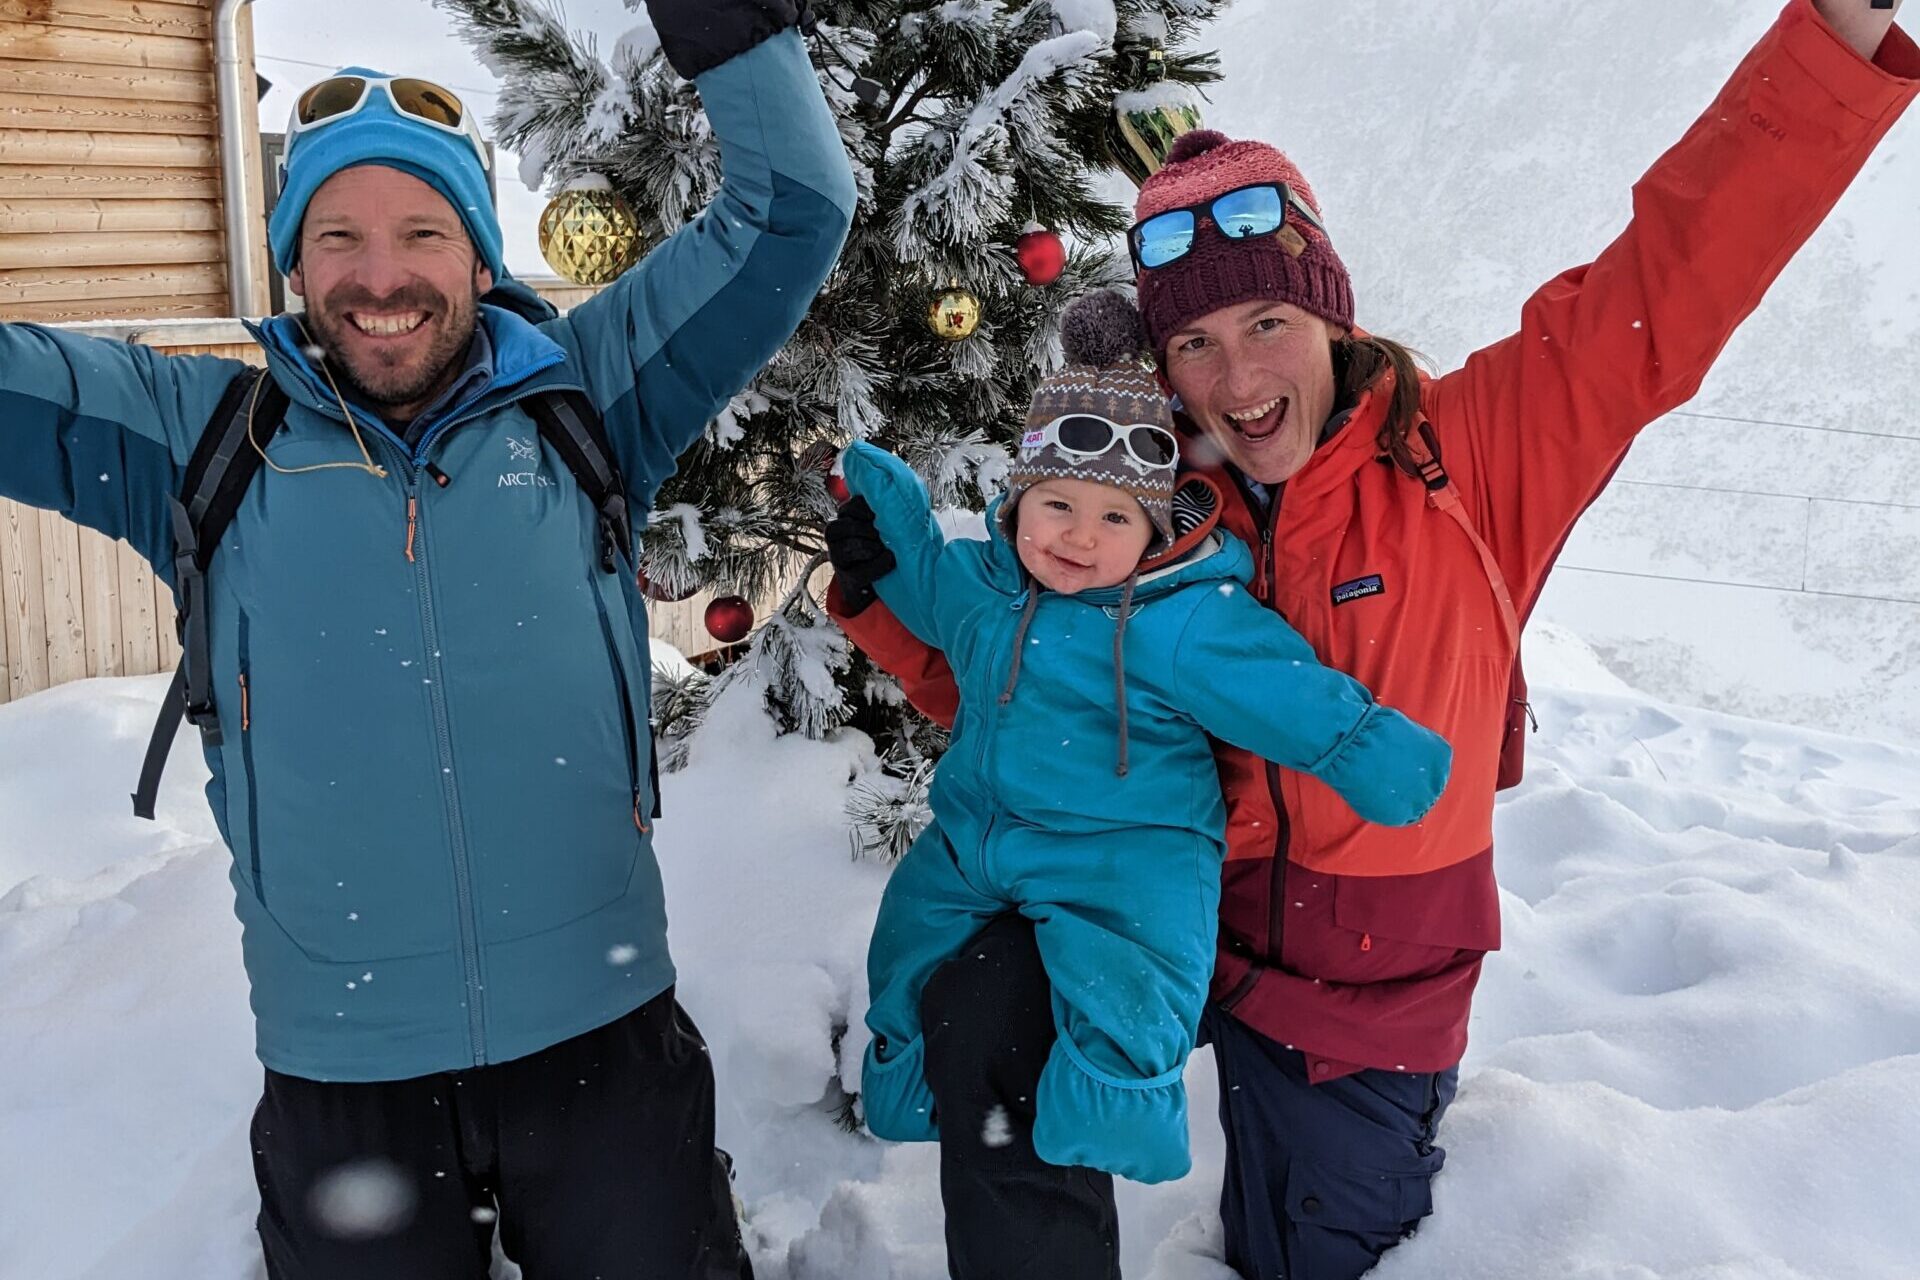 Atlin Heli Ski | Heli Skiing | Skiing | Guiding | Adventure | Outdoor | Vacation | Heli-Snowboarding | Powder | British Columbia | Friends | Groups | Familytime | North of Ordinary | Experience of a lifetime | Happy Guests | Klondike | Gold Rush | Fun Days | Ski Family